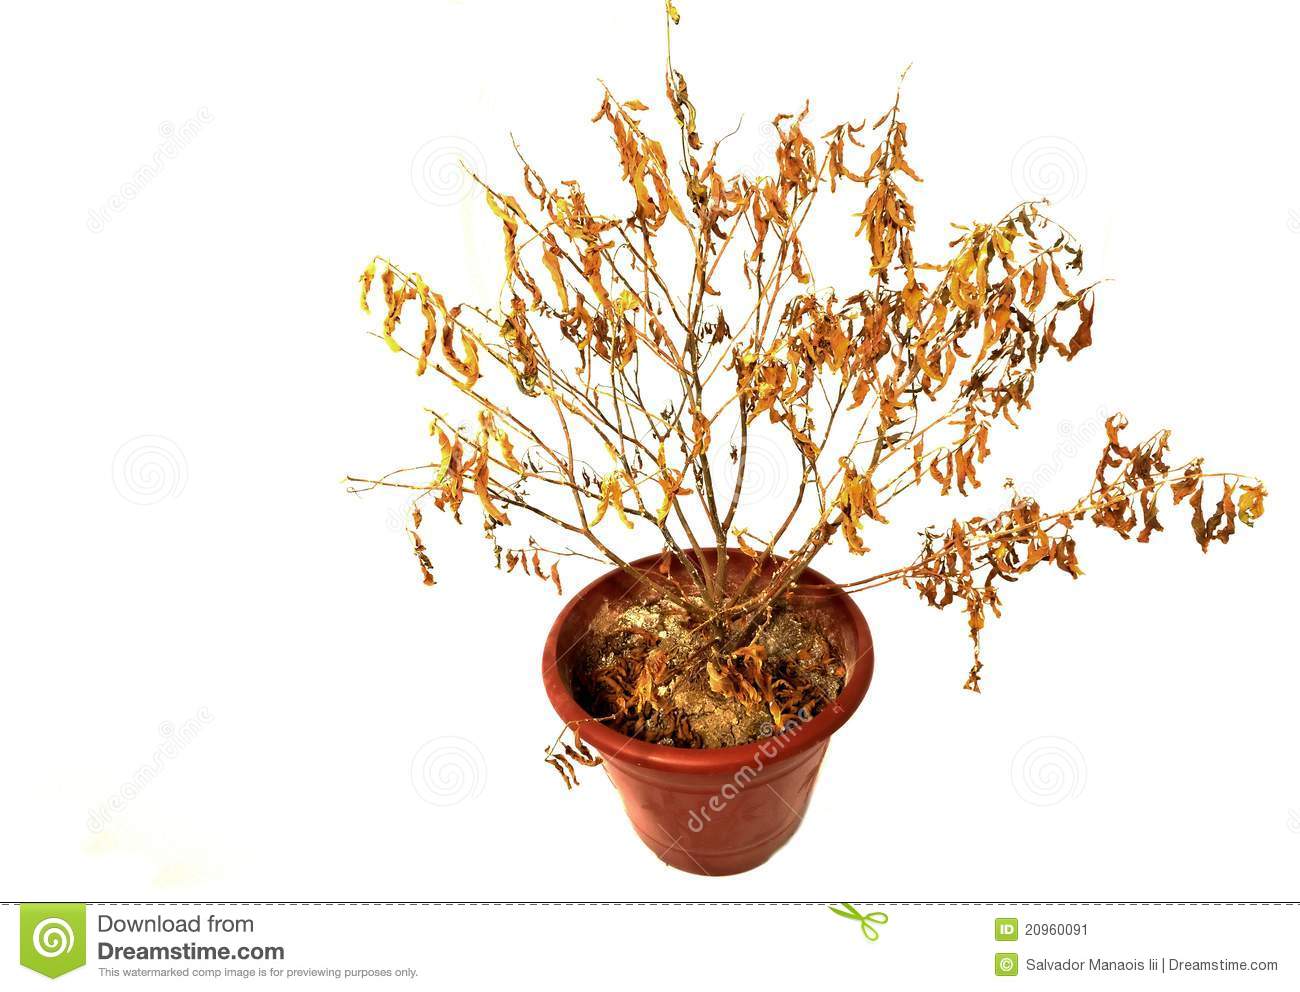 Dry area plants clipart 20 free Cliparts | Download images on